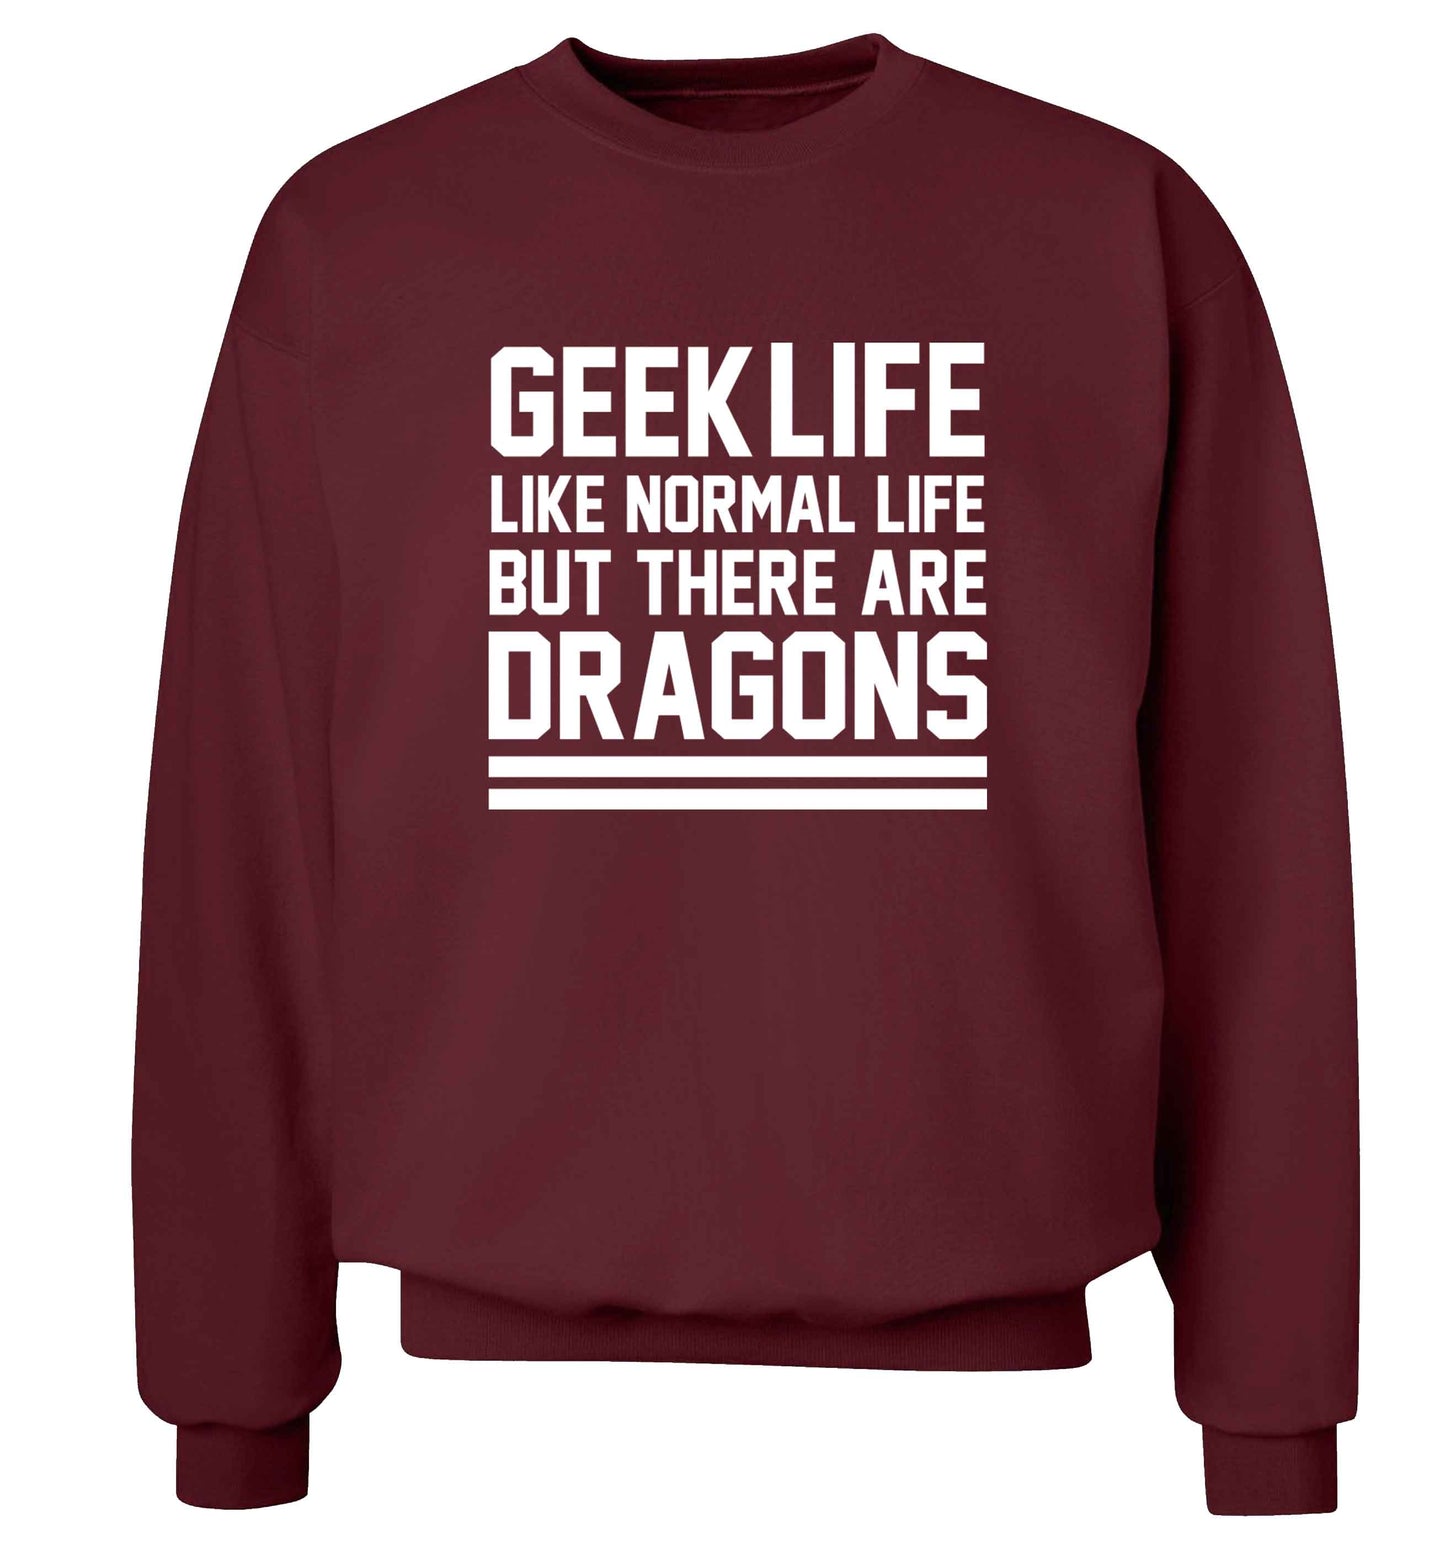 Geek life like normal life but there are dragons adult's unisex maroon sweater 2XL